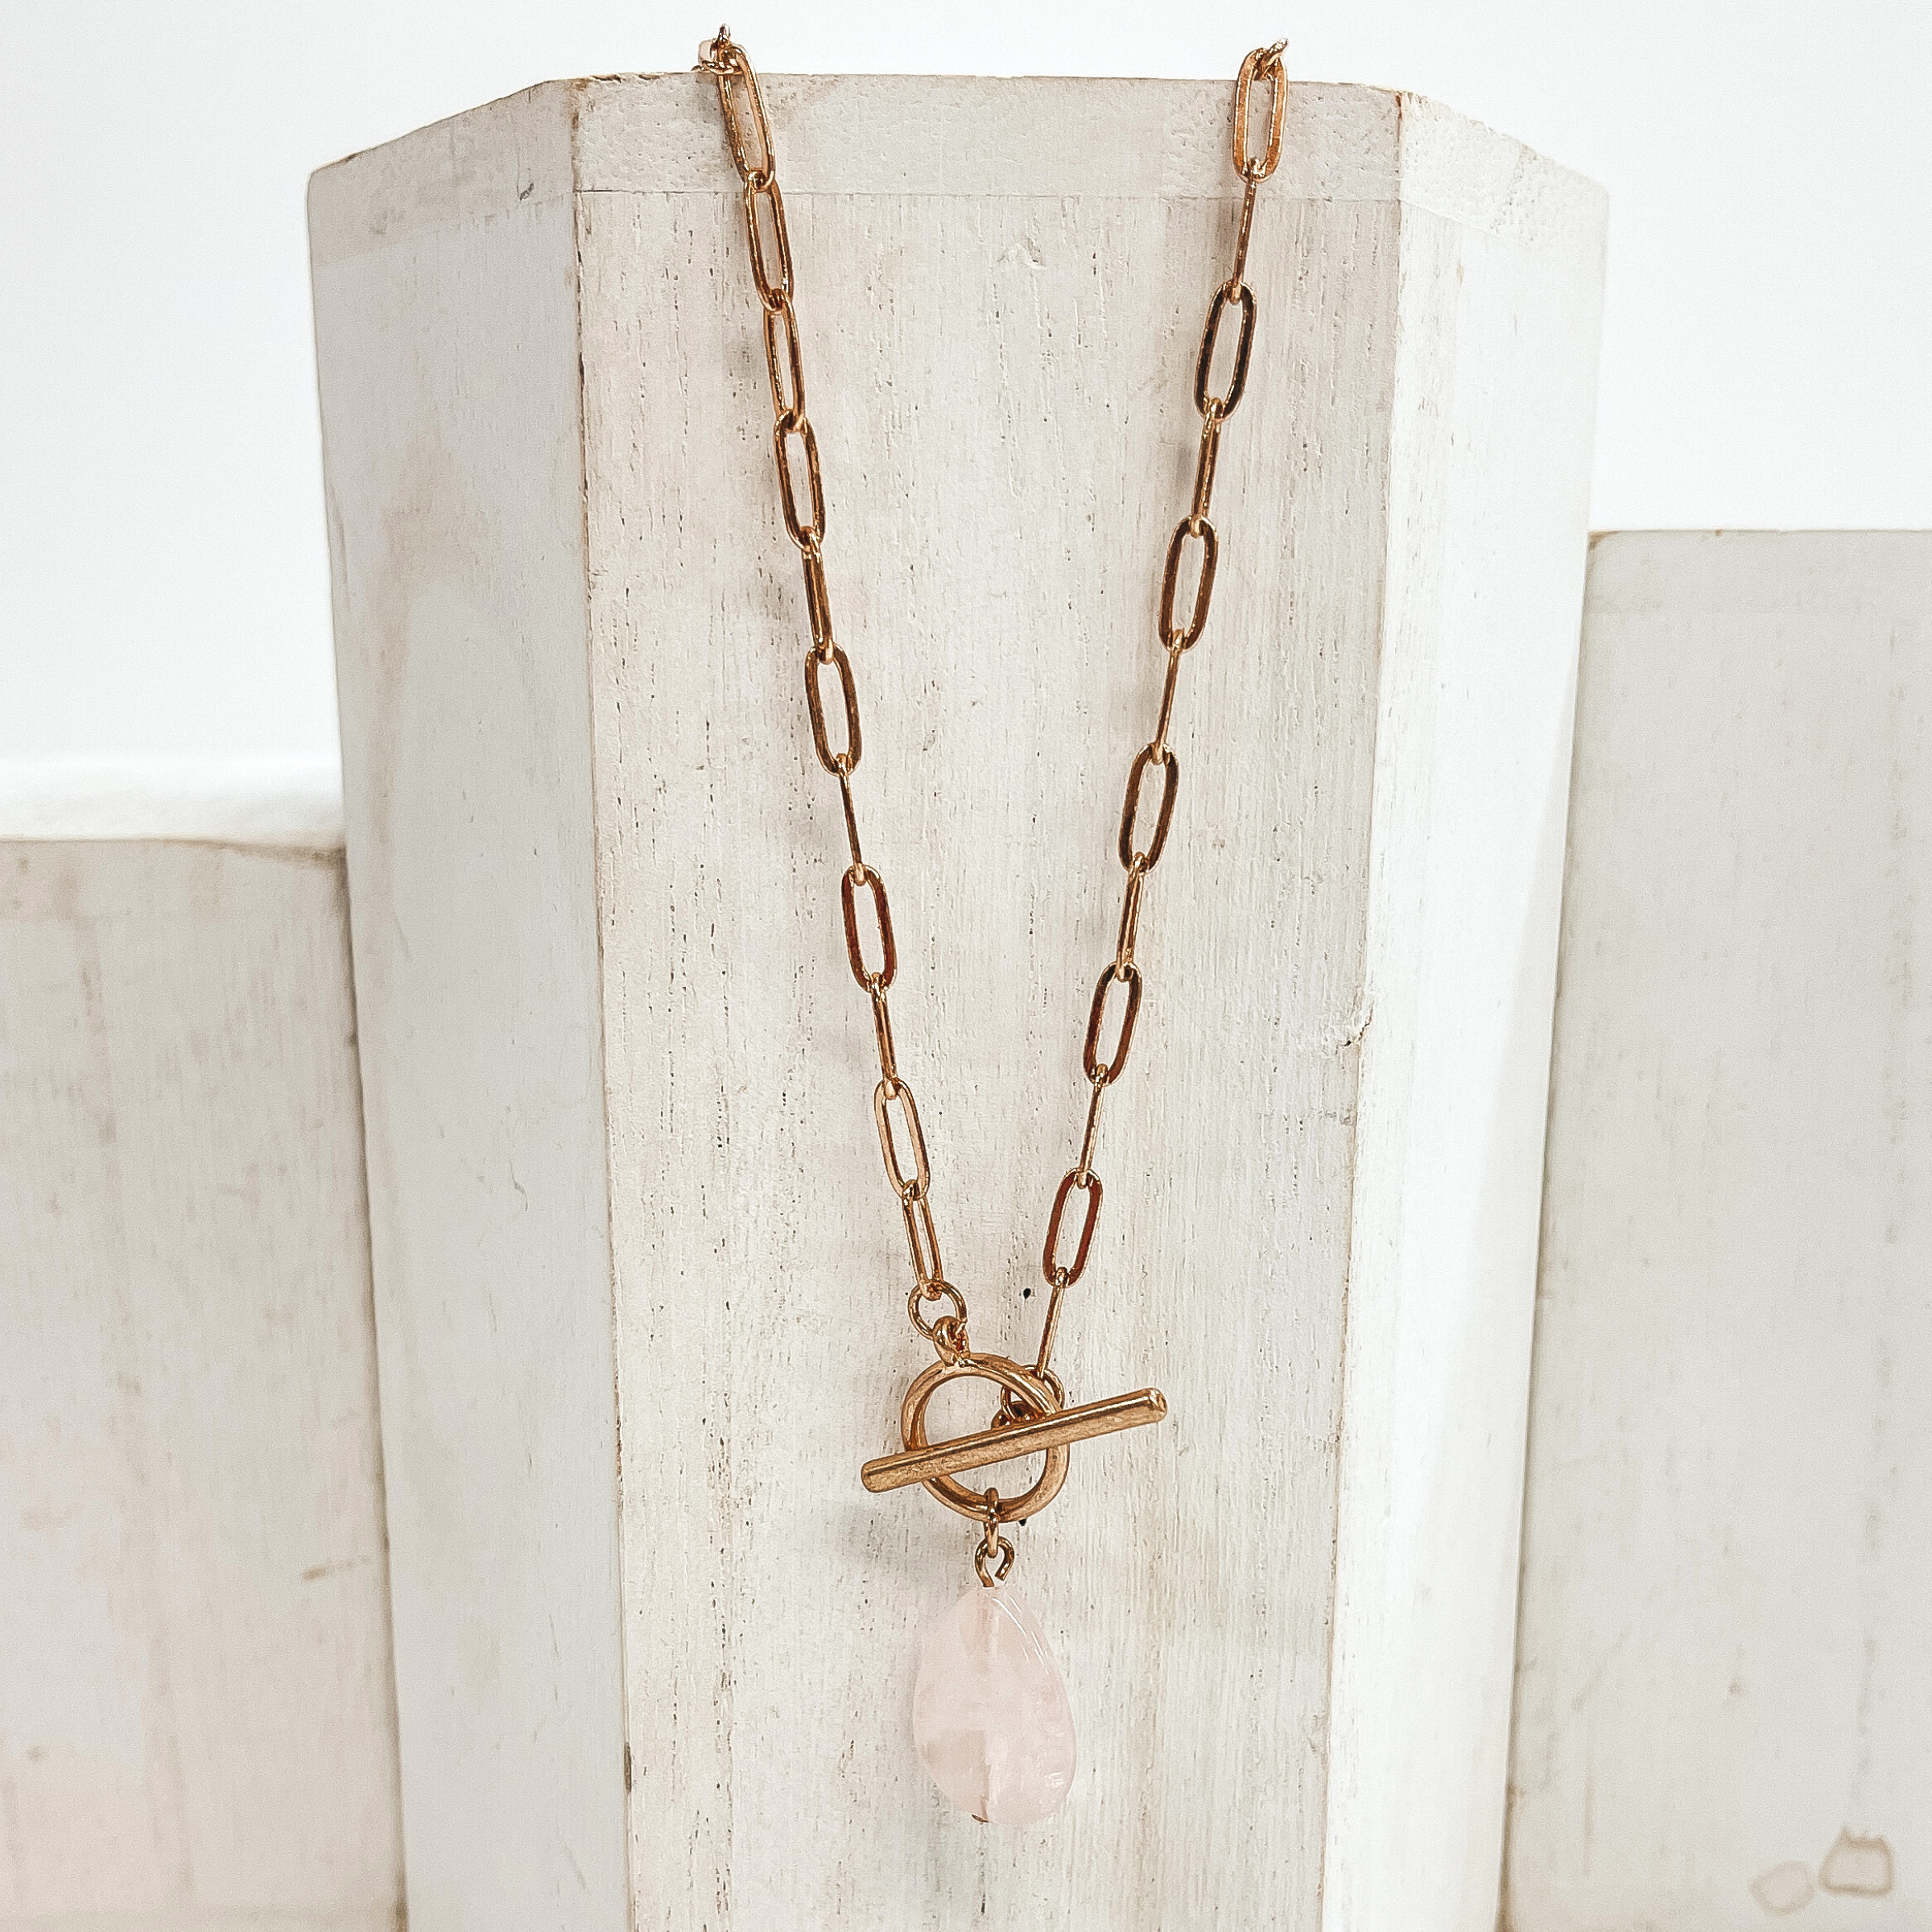 Gold paperclip chain necklace with toggle clasp and  natural stone teardrop pendant in light pink.  Taken on  a white block and white background.